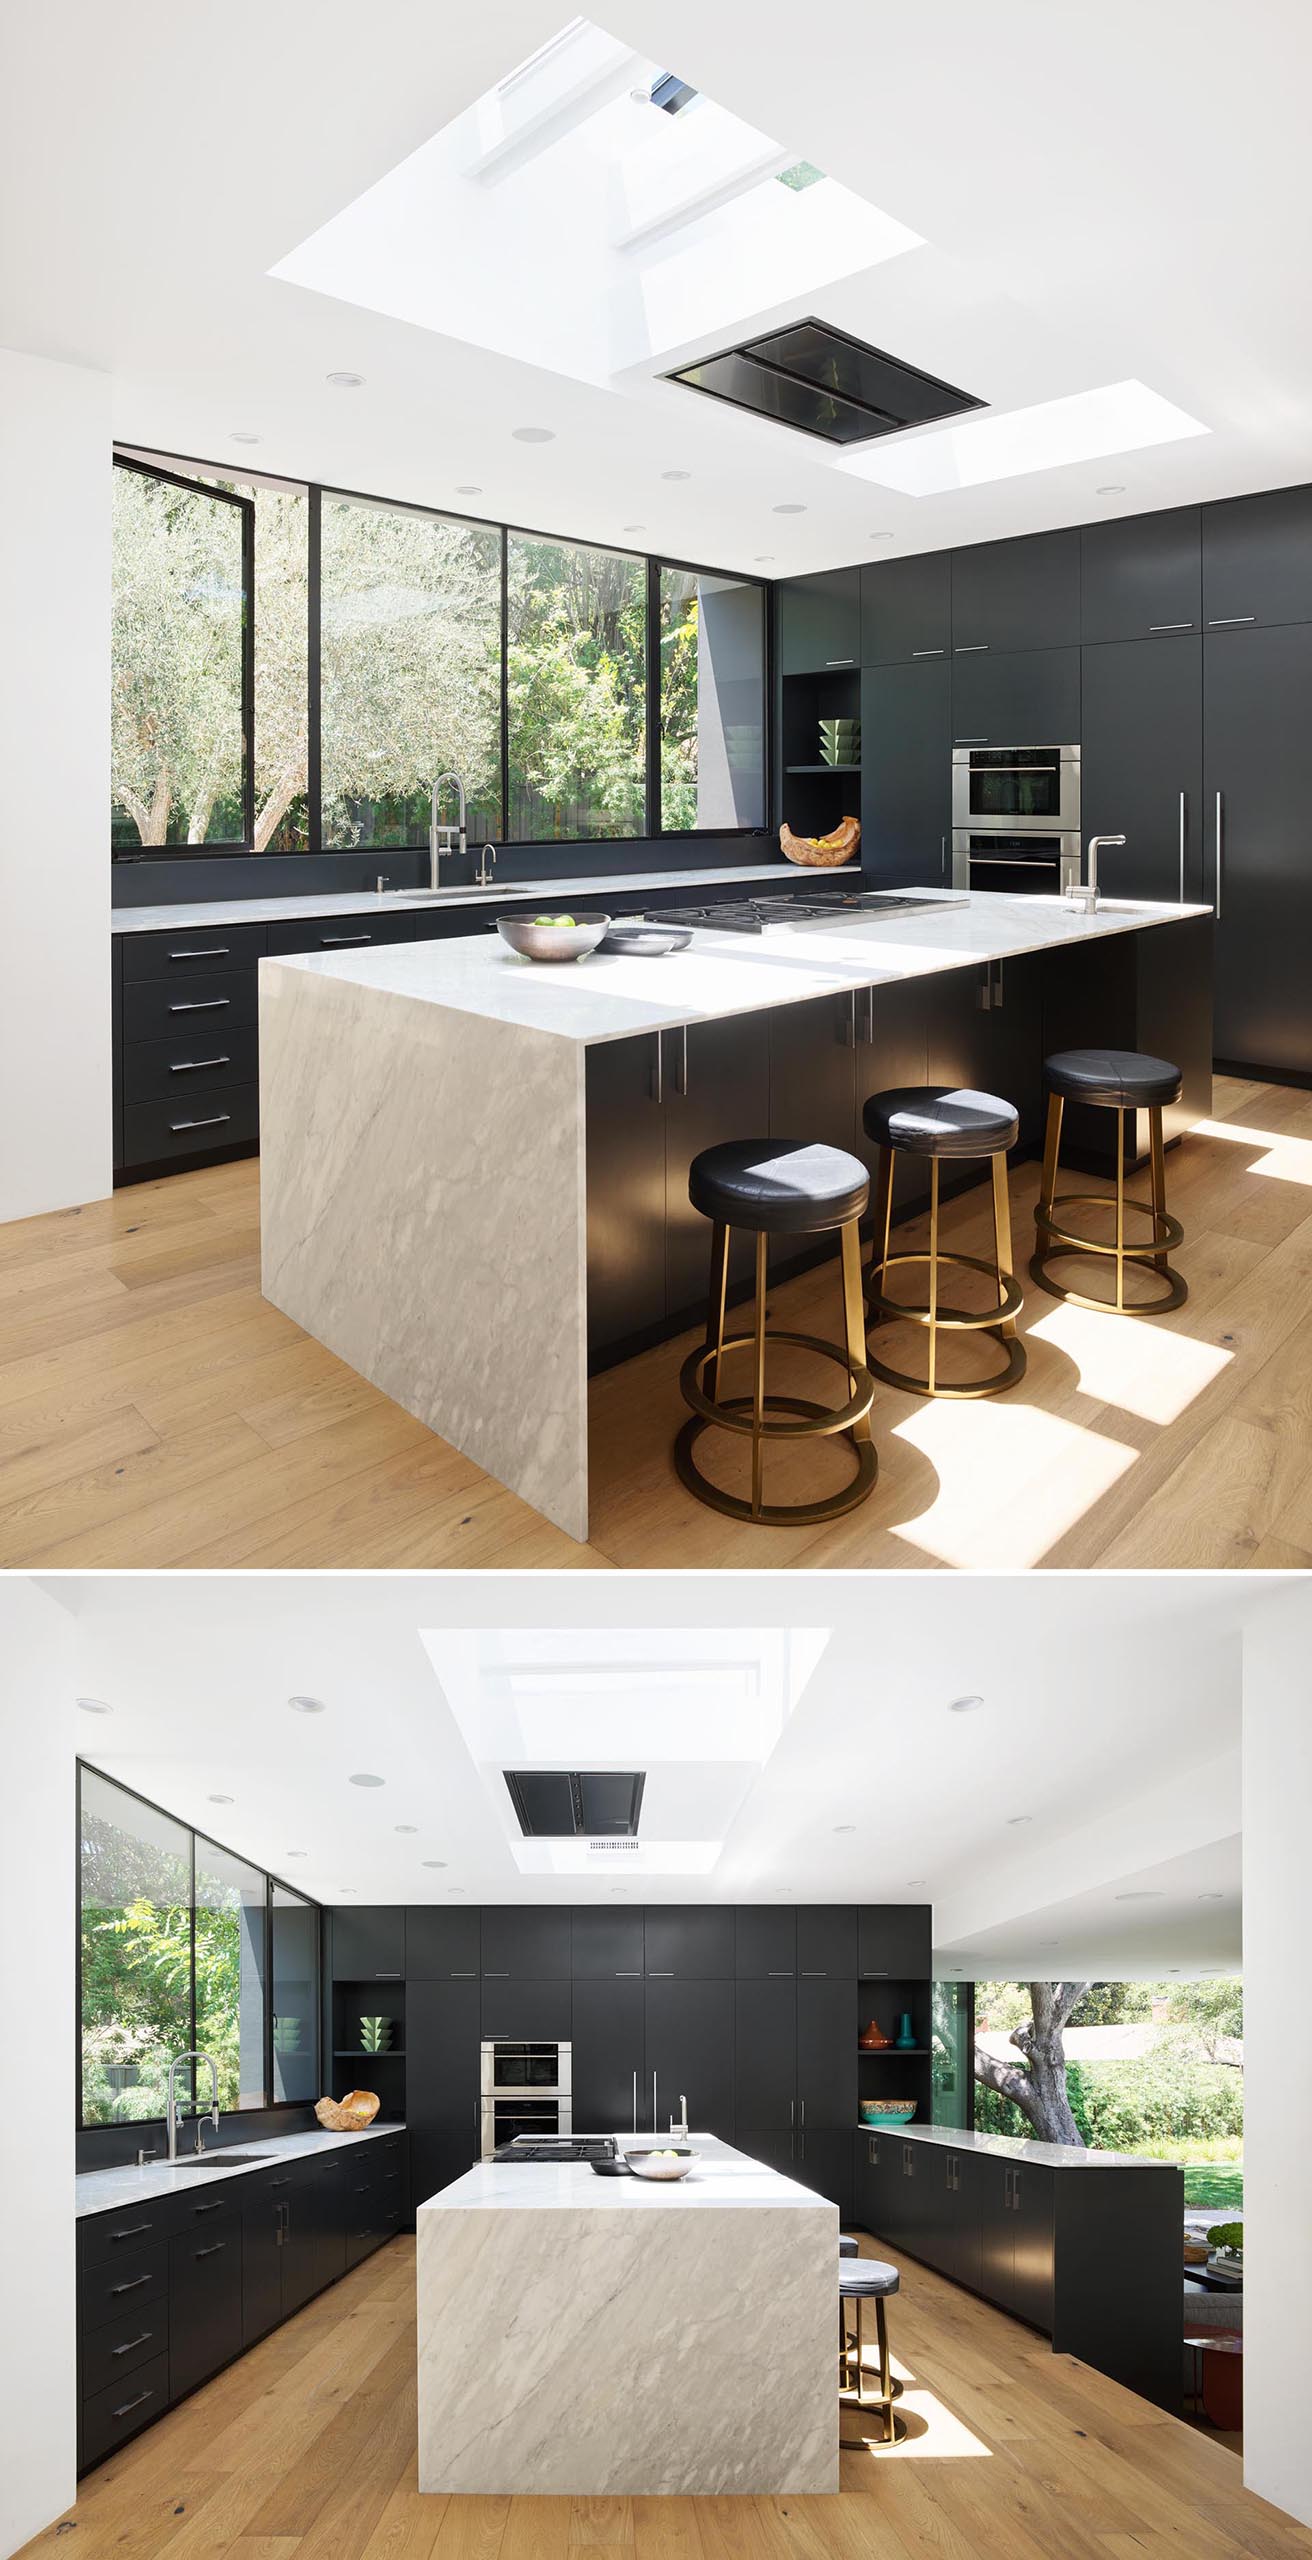 A modern kitchen with skylights, and Calcutta Cream marble countertops that contrast the matte black cabinets.